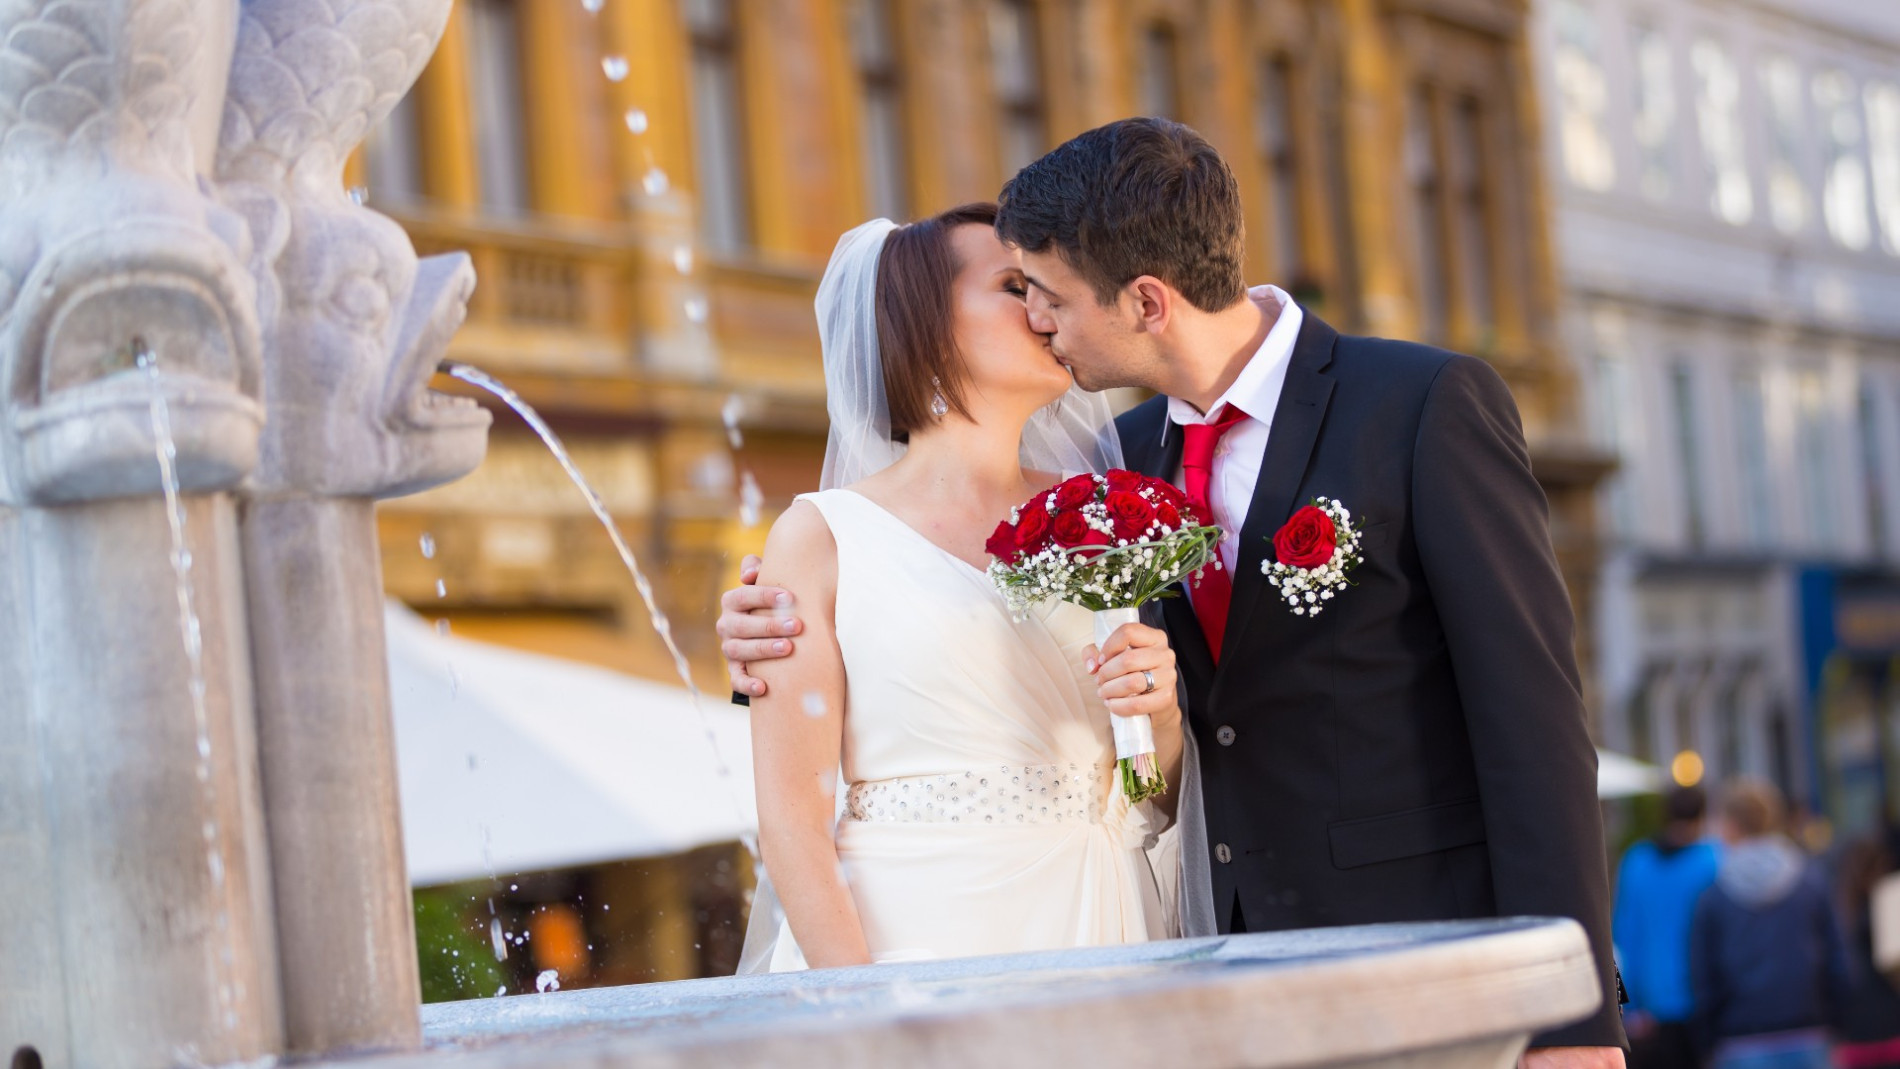 The newlyweds kiss in front of the fountain on Gornji trg.